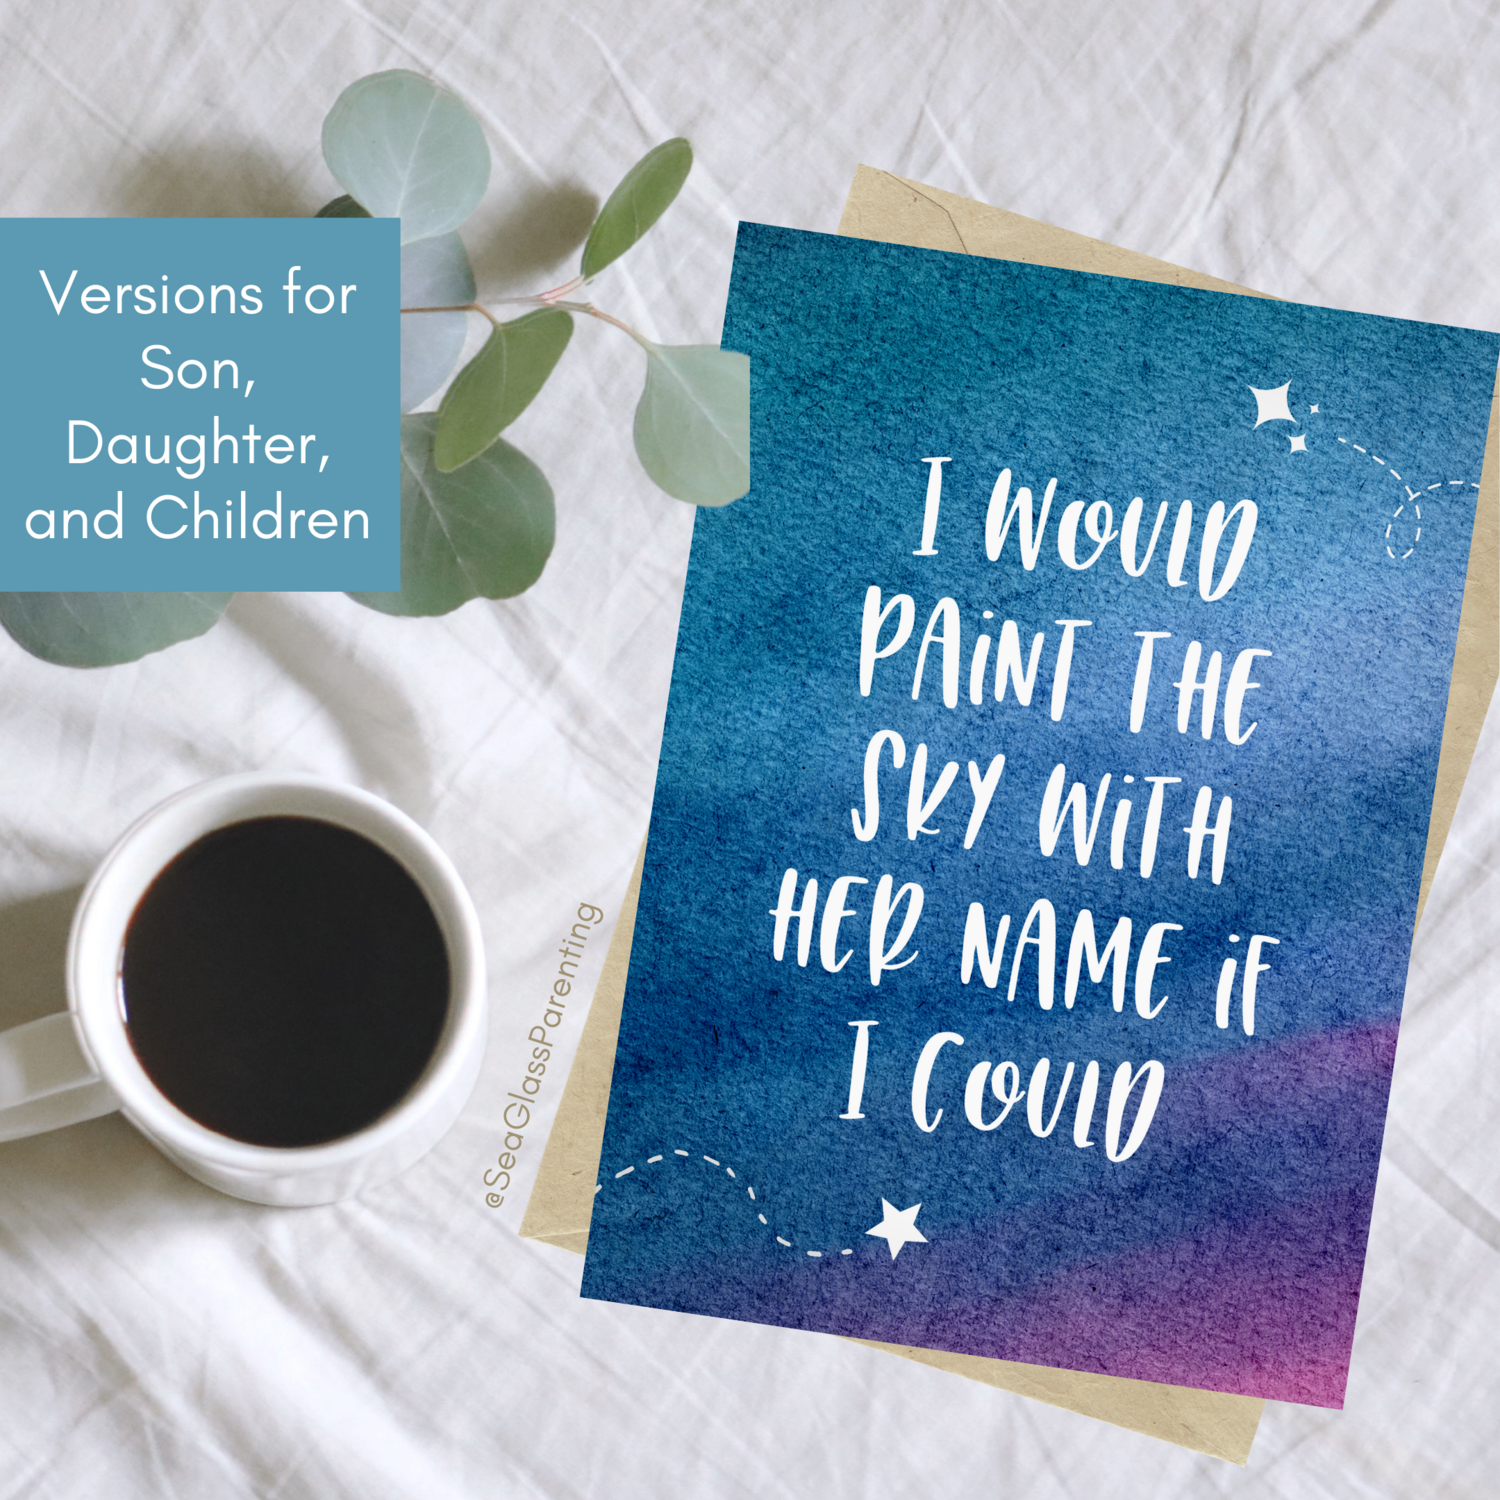 I would paint the sky with their names if I could—Baby loss sympathy & remembrance (greeting card)